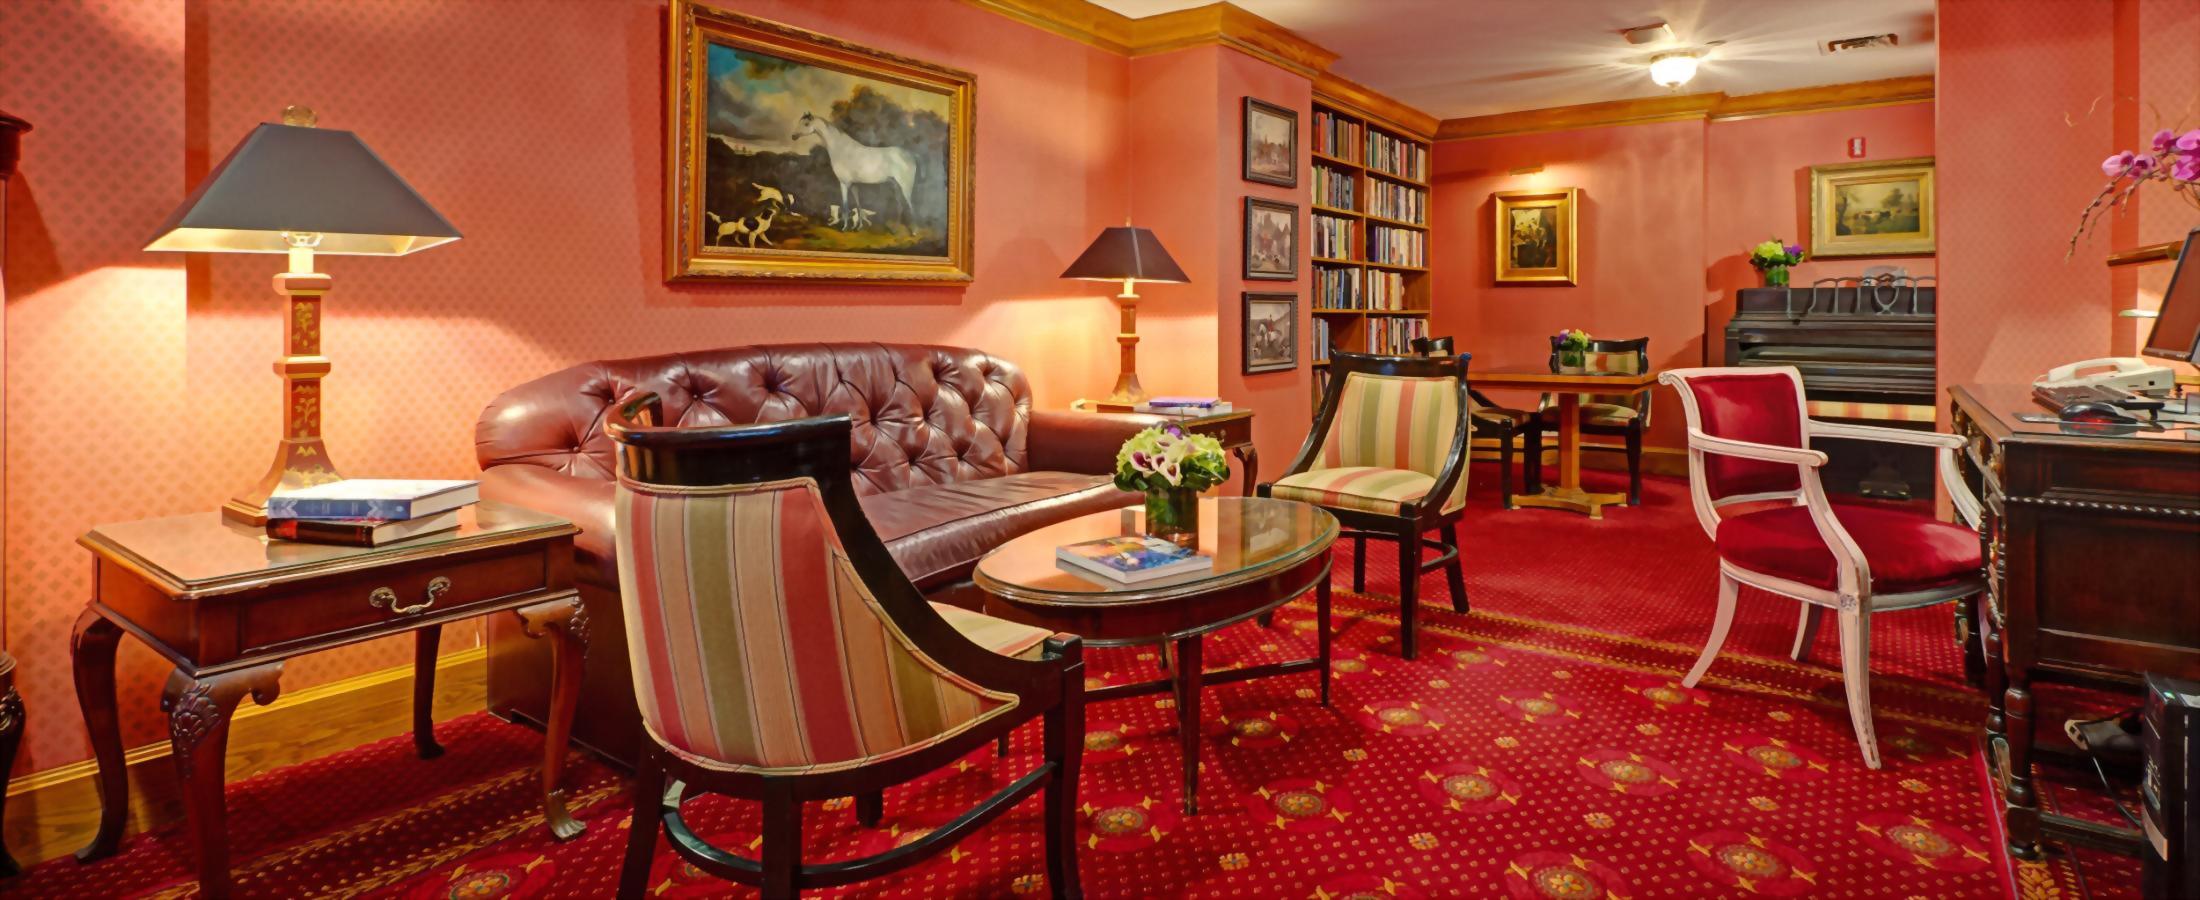 The library at the Hotel Elysee in New York is open for all guests to use the computer or borrow a book.